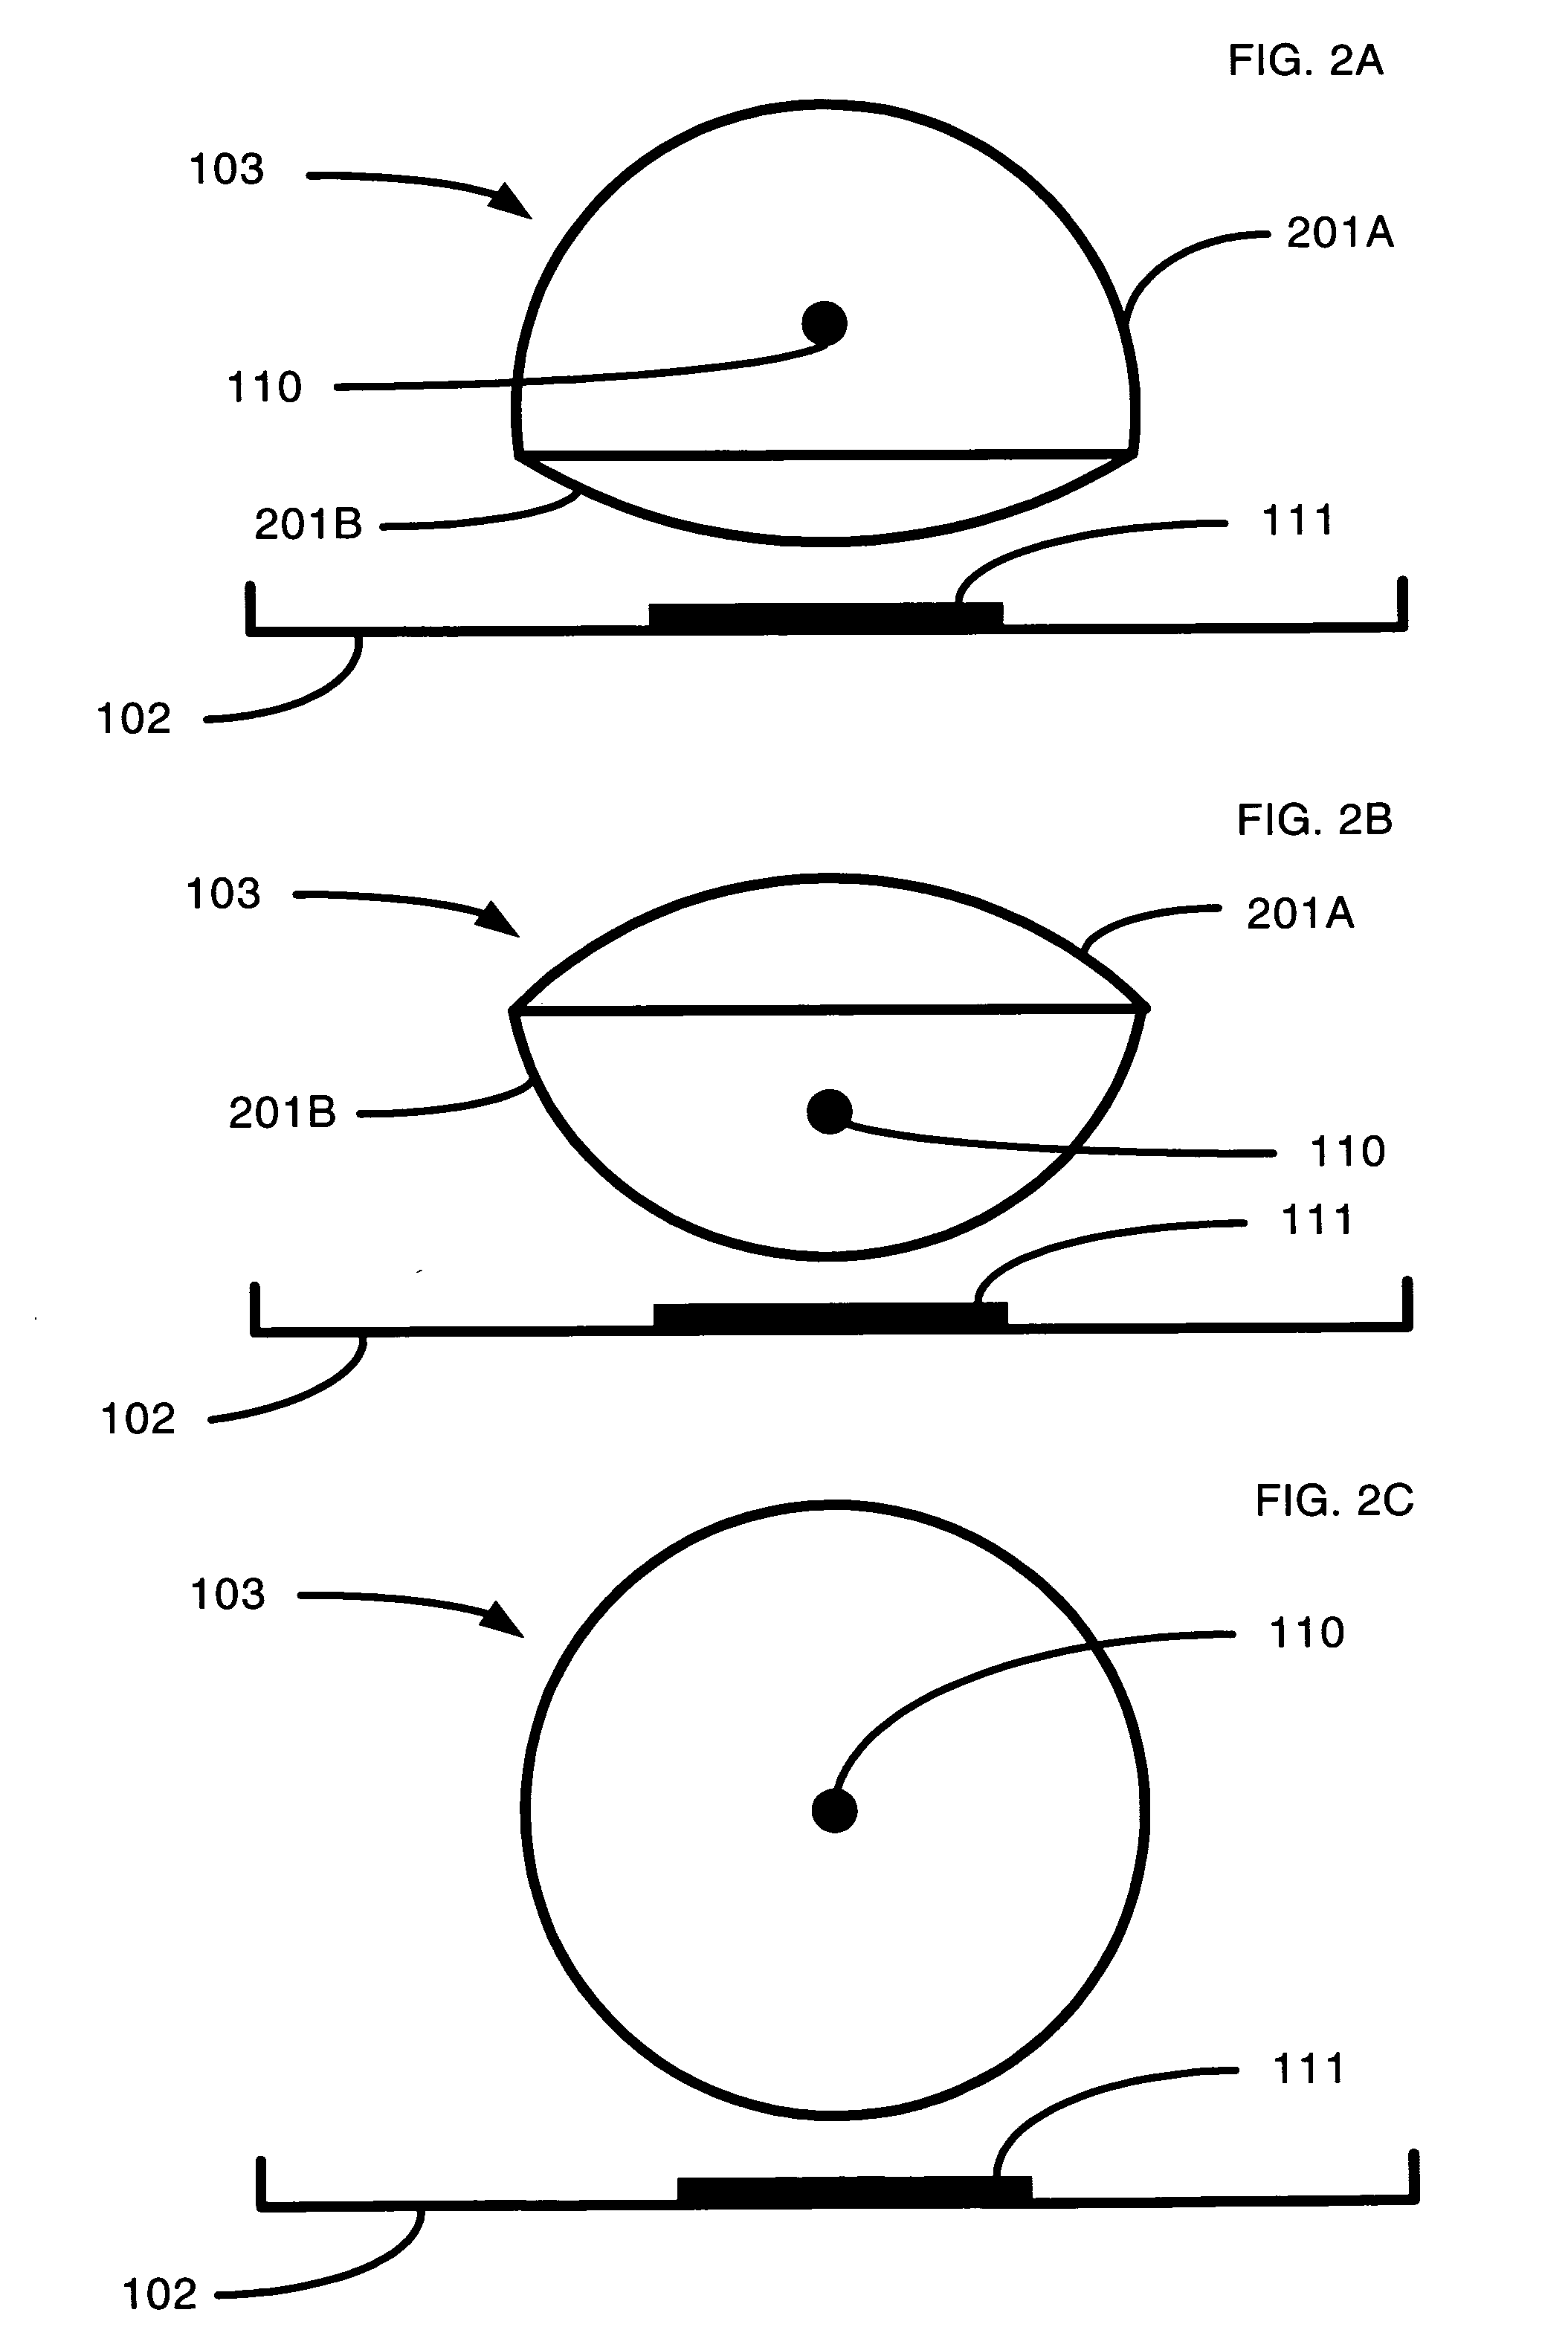 Moving lens for immersion optical lithography